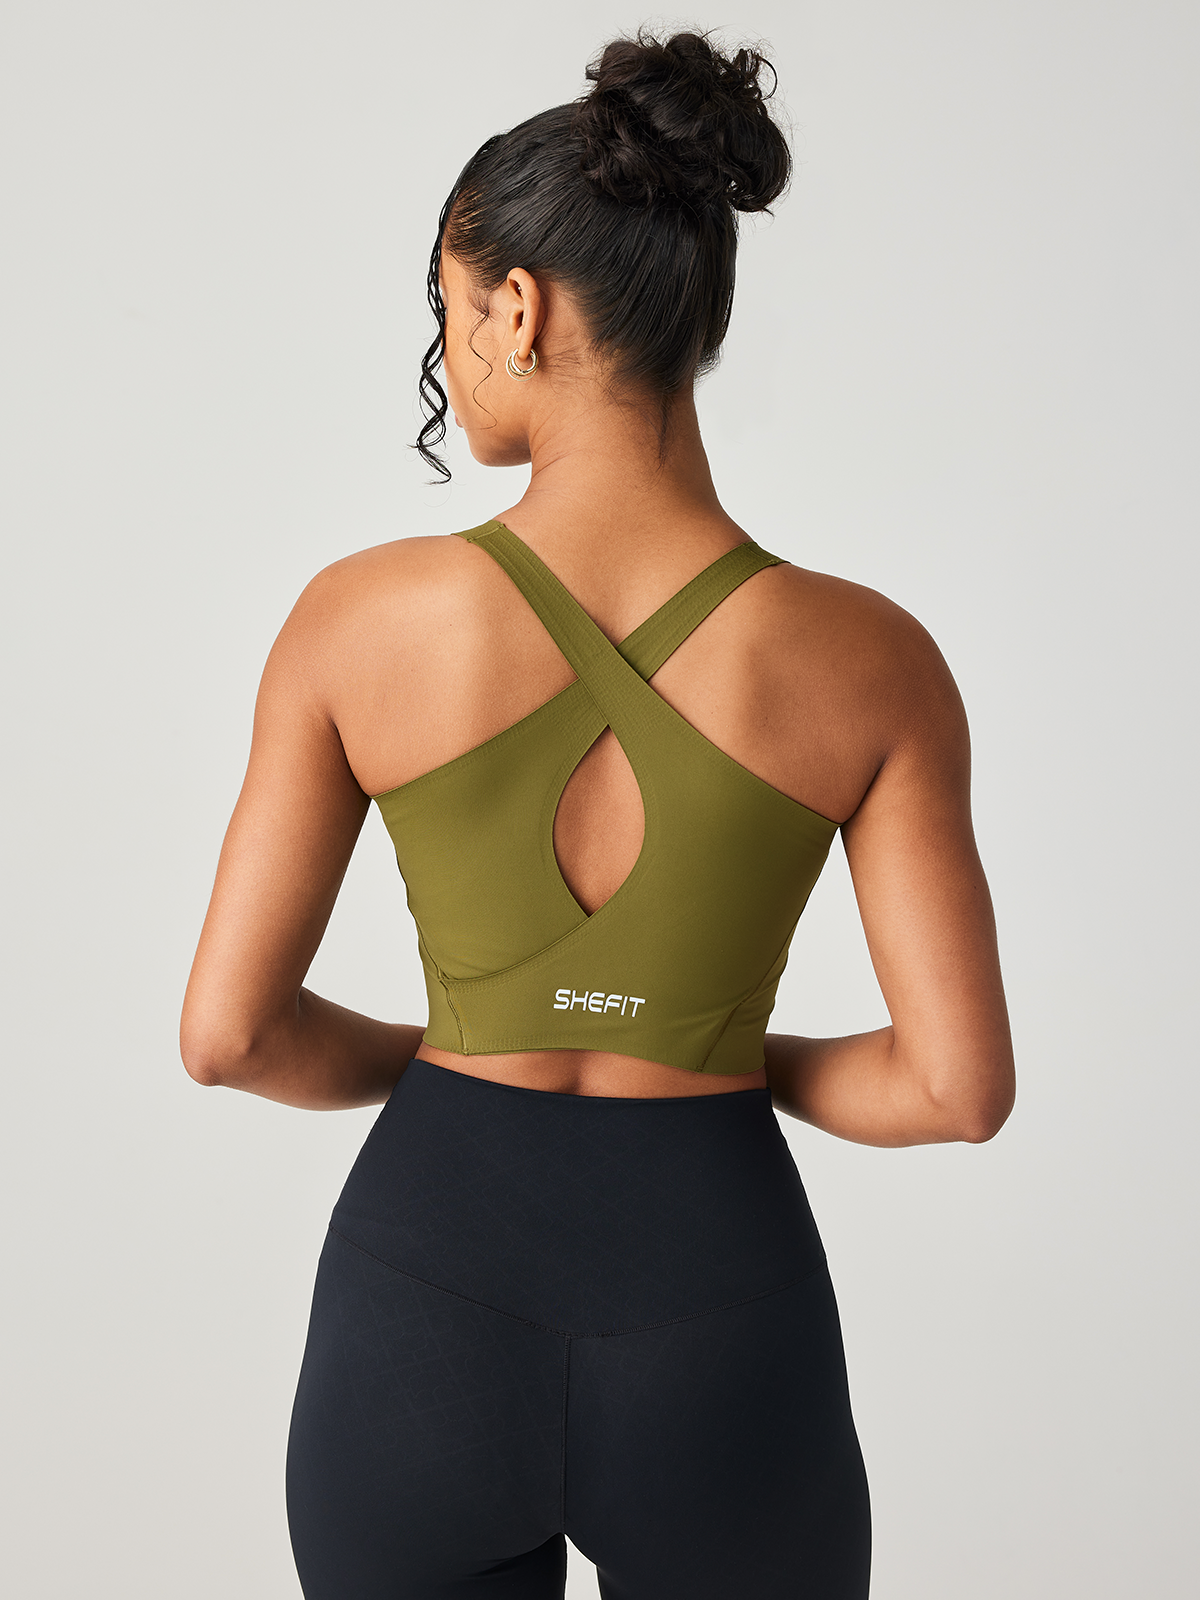 Replying to @vchex TOP SPORTS BRA I GET ASKED ABOUT : @shefit on